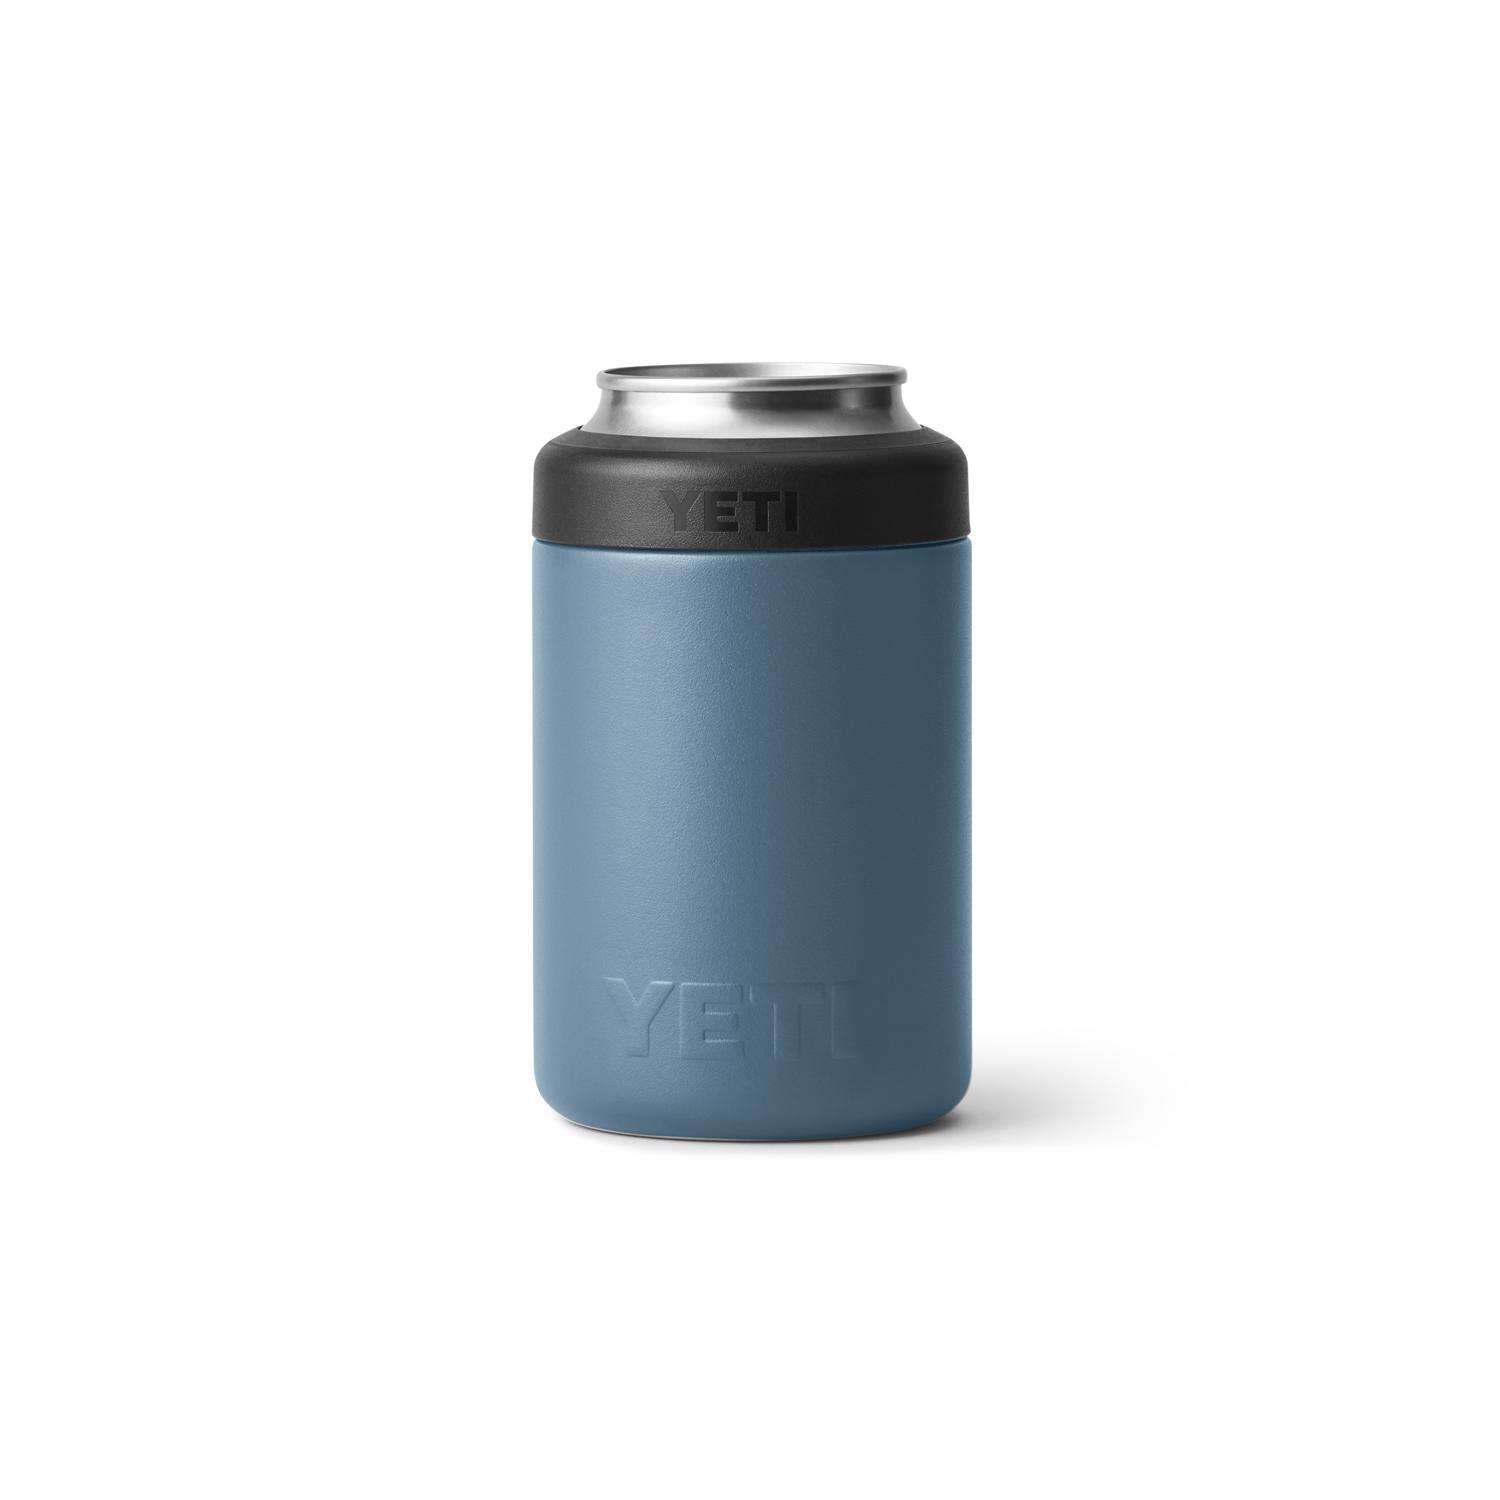  YETI Rambler 12 oz. Colster Can Insulator for Standard Size  Cans, Black (NO CAN INSERT): Home & Kitchen